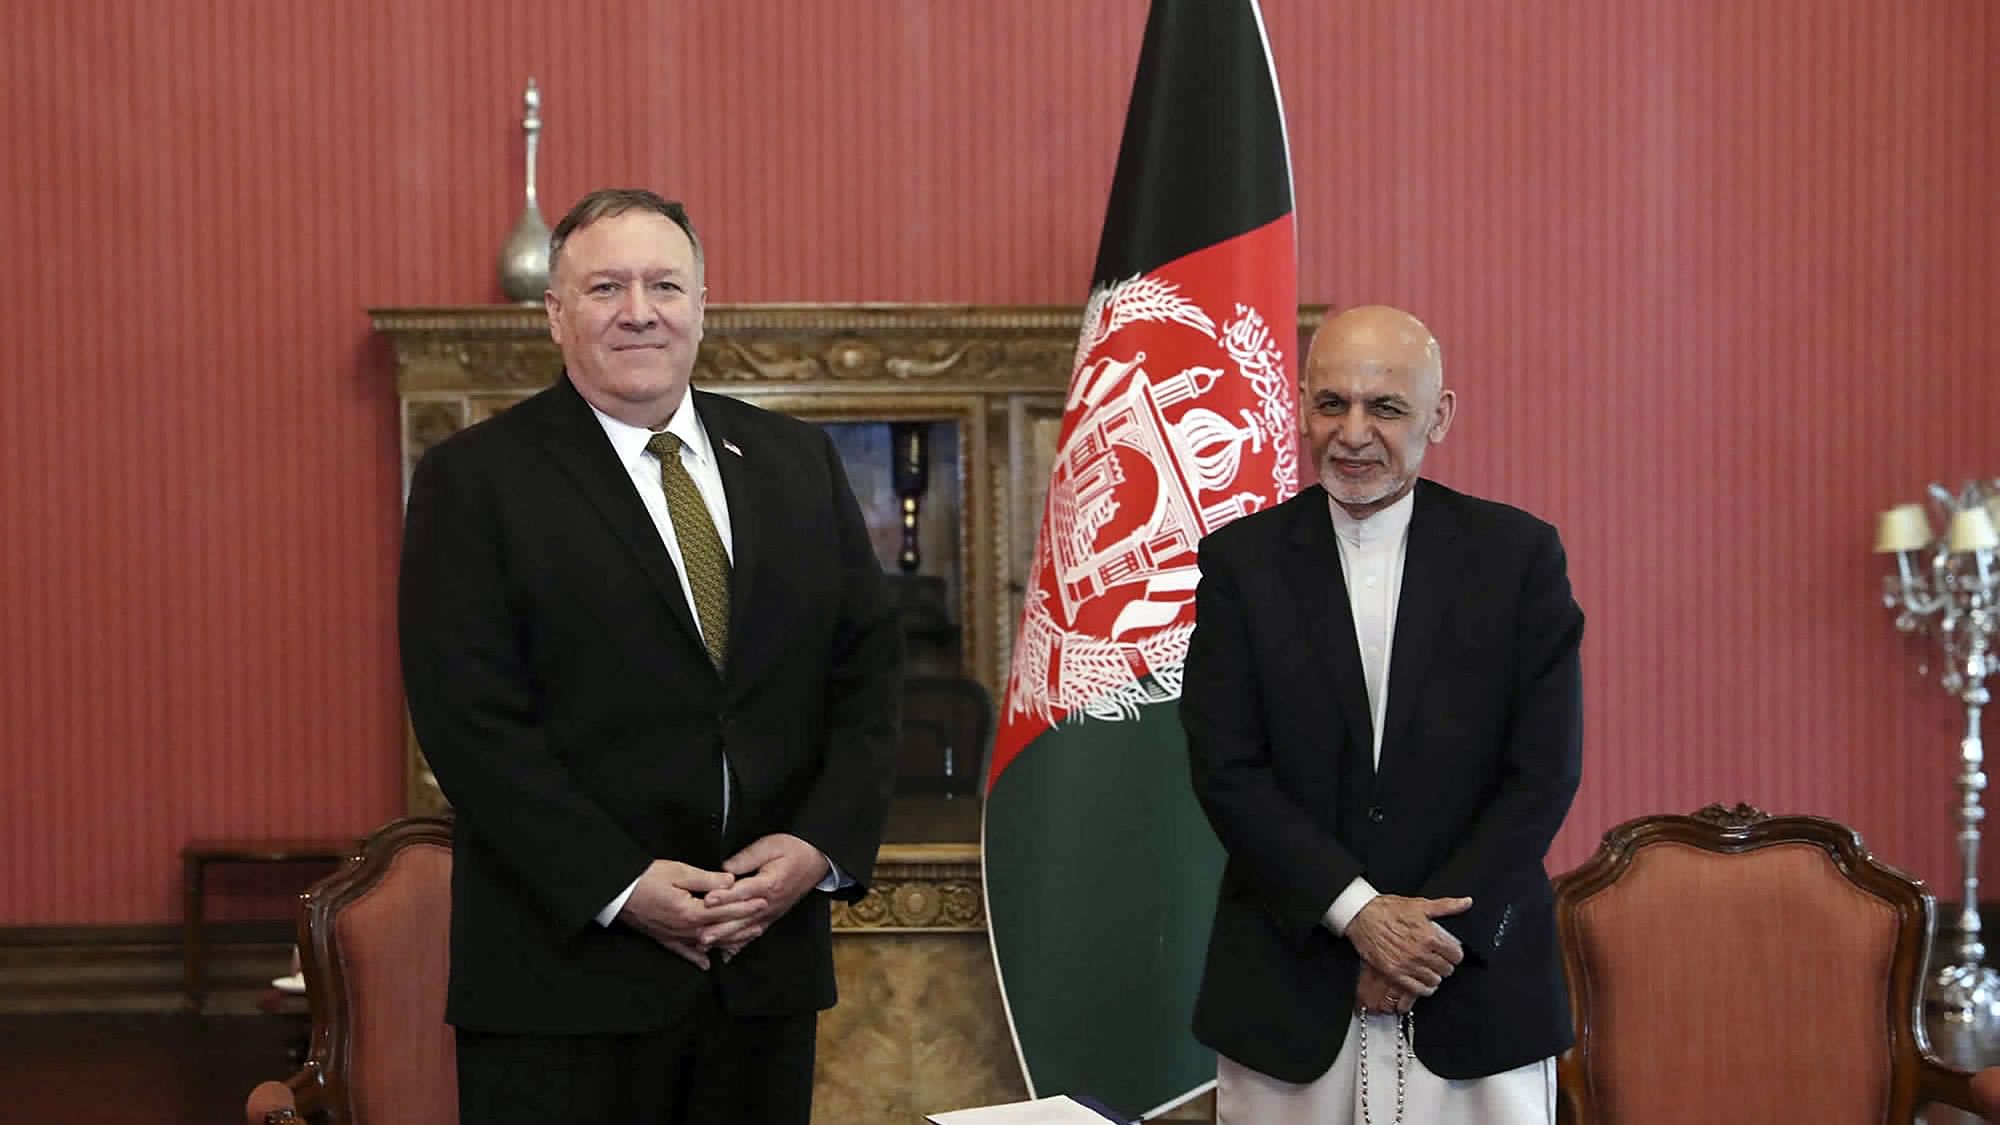 US Secretary of State Mike Pompeo, left, stands with Afghan President Ashraf Ghani, at the Presidential Palace in Kabul, Afghanistan, Monday, 23 March.